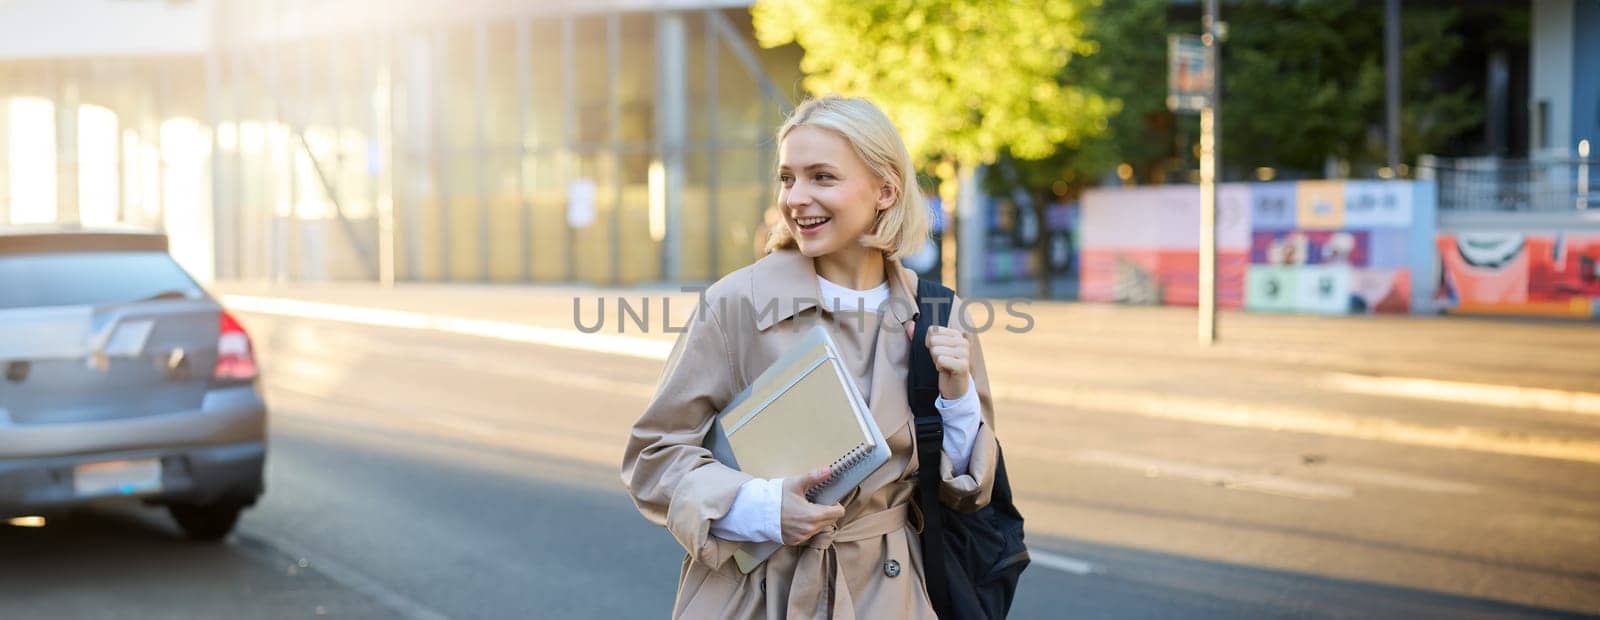 Lifestyle portrait of young woman walking on street with backpack and notebook, looking aside, saying hello to someone on her way to university or college.